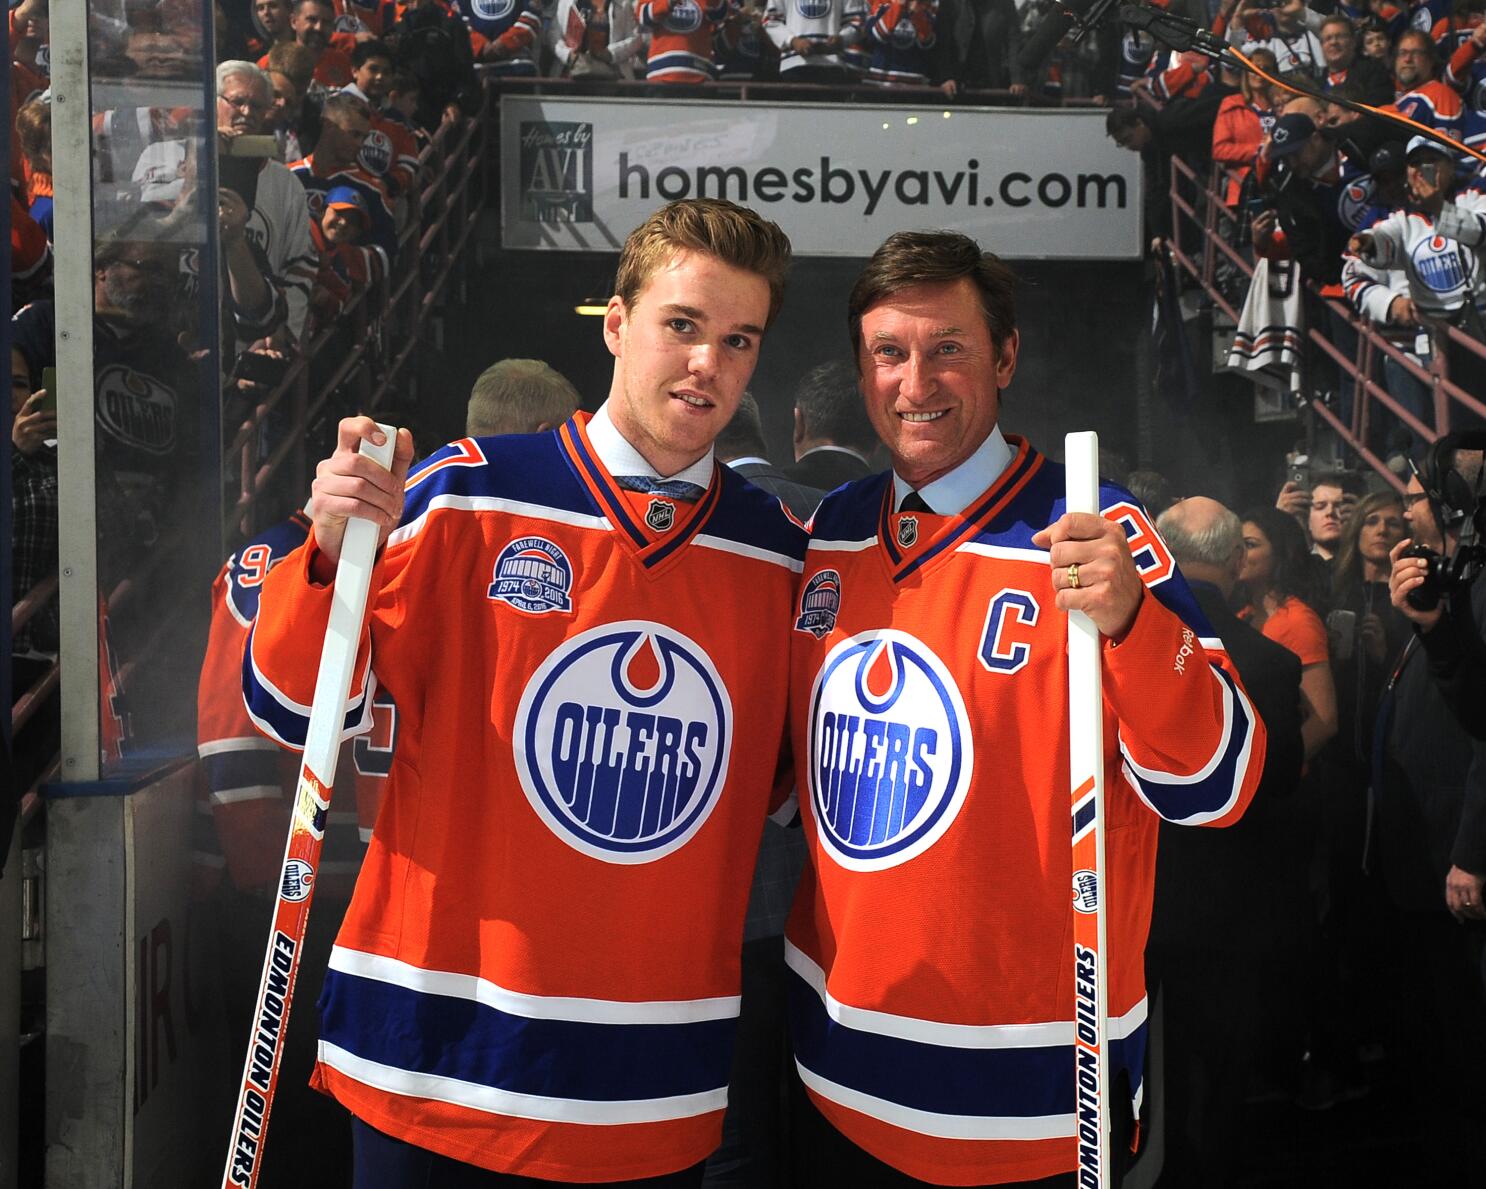 Wayne Gretzky says NHL playoffs with Oilers' McDavid and Leafs